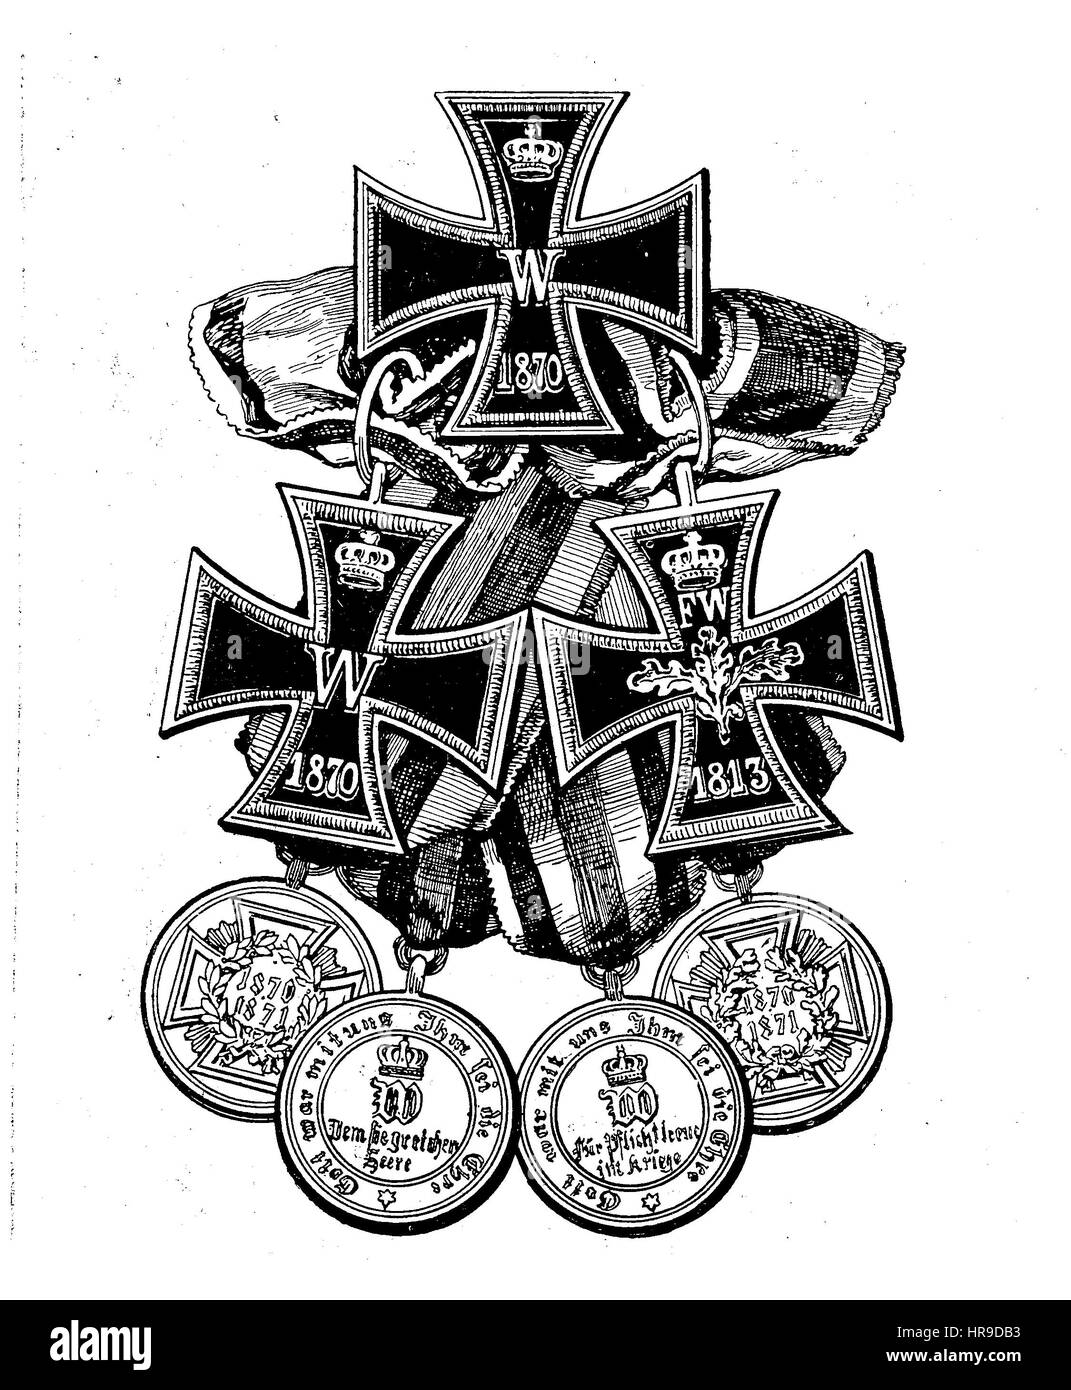 The Iron Cross, Eisernes Kreuz, abbreviated EK was a military decoration in the Kingdom of Prussia, and later in the German Empire, Situation from the time of The Franco-Prussian War or Franco-German War,  Deutsch-Franzoesischer Krieg, 1870-1871, Reproduction of an original woodcut from the year 1885, digital improved Stock Photo